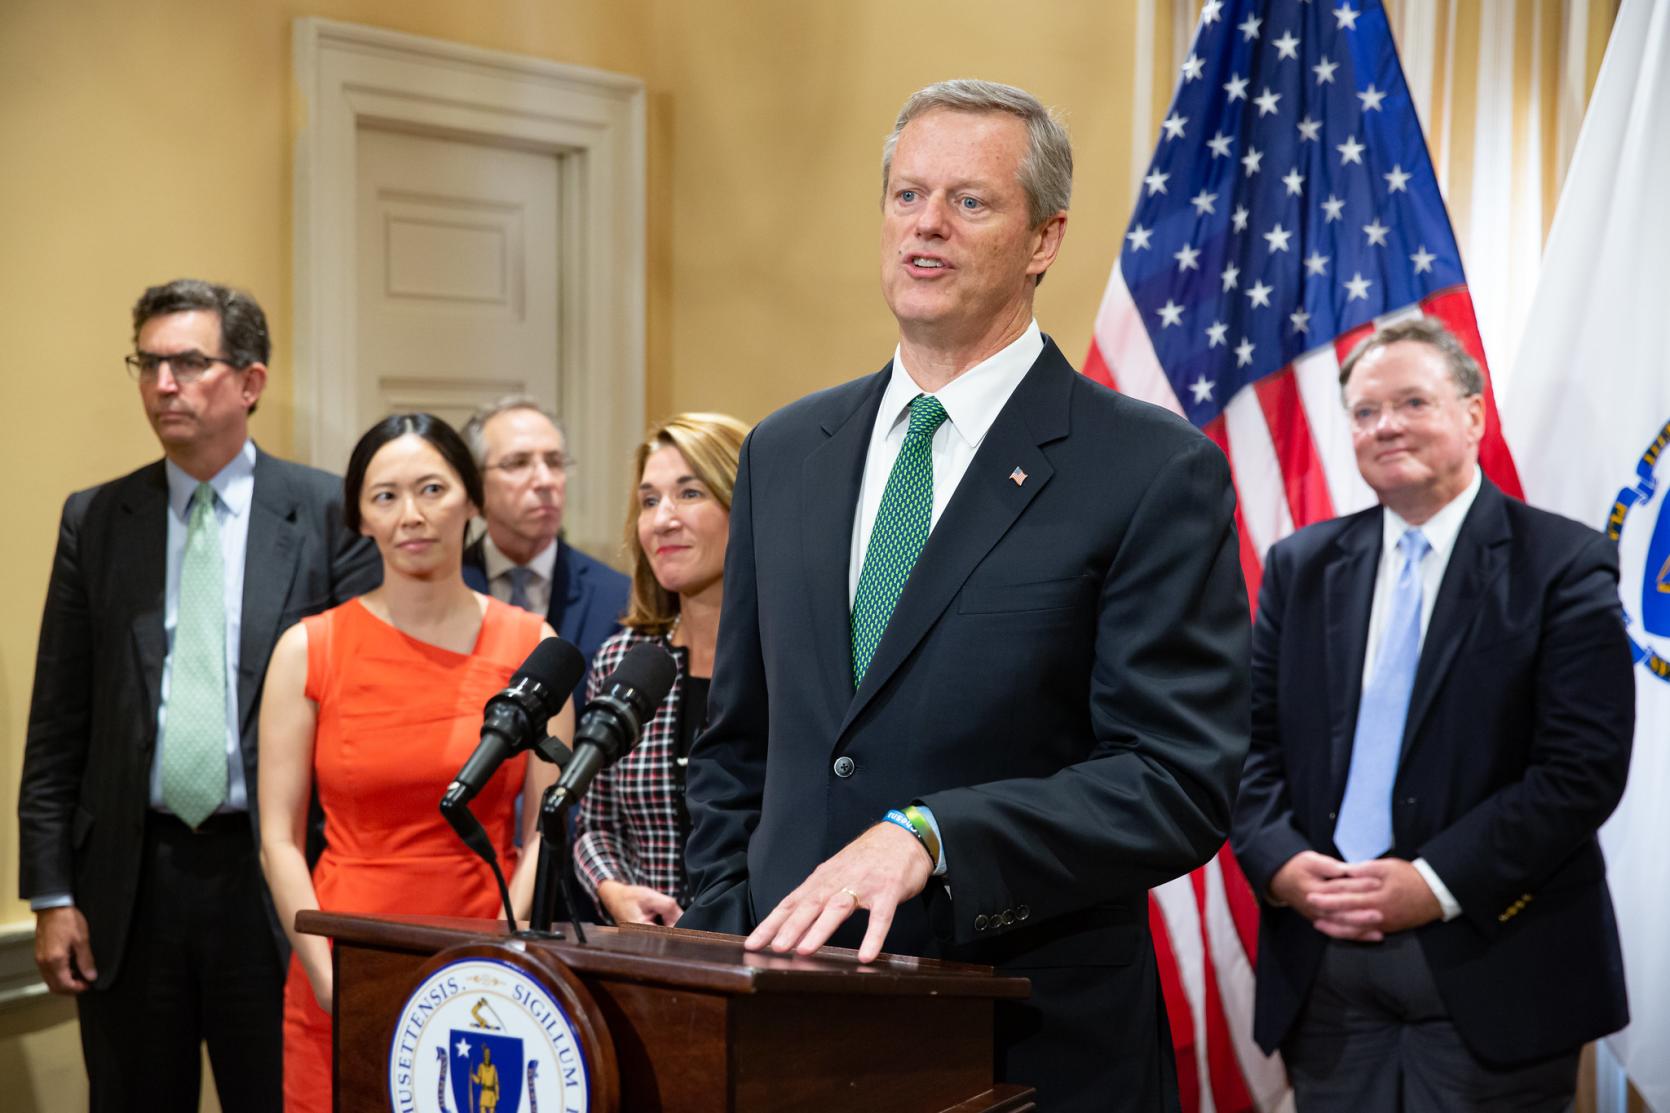 Six former state housing officials joined Gov. Charlie Baker and Lt. Gov. Karyn Polito to endorse "An Act to Promote Housing Choices." 